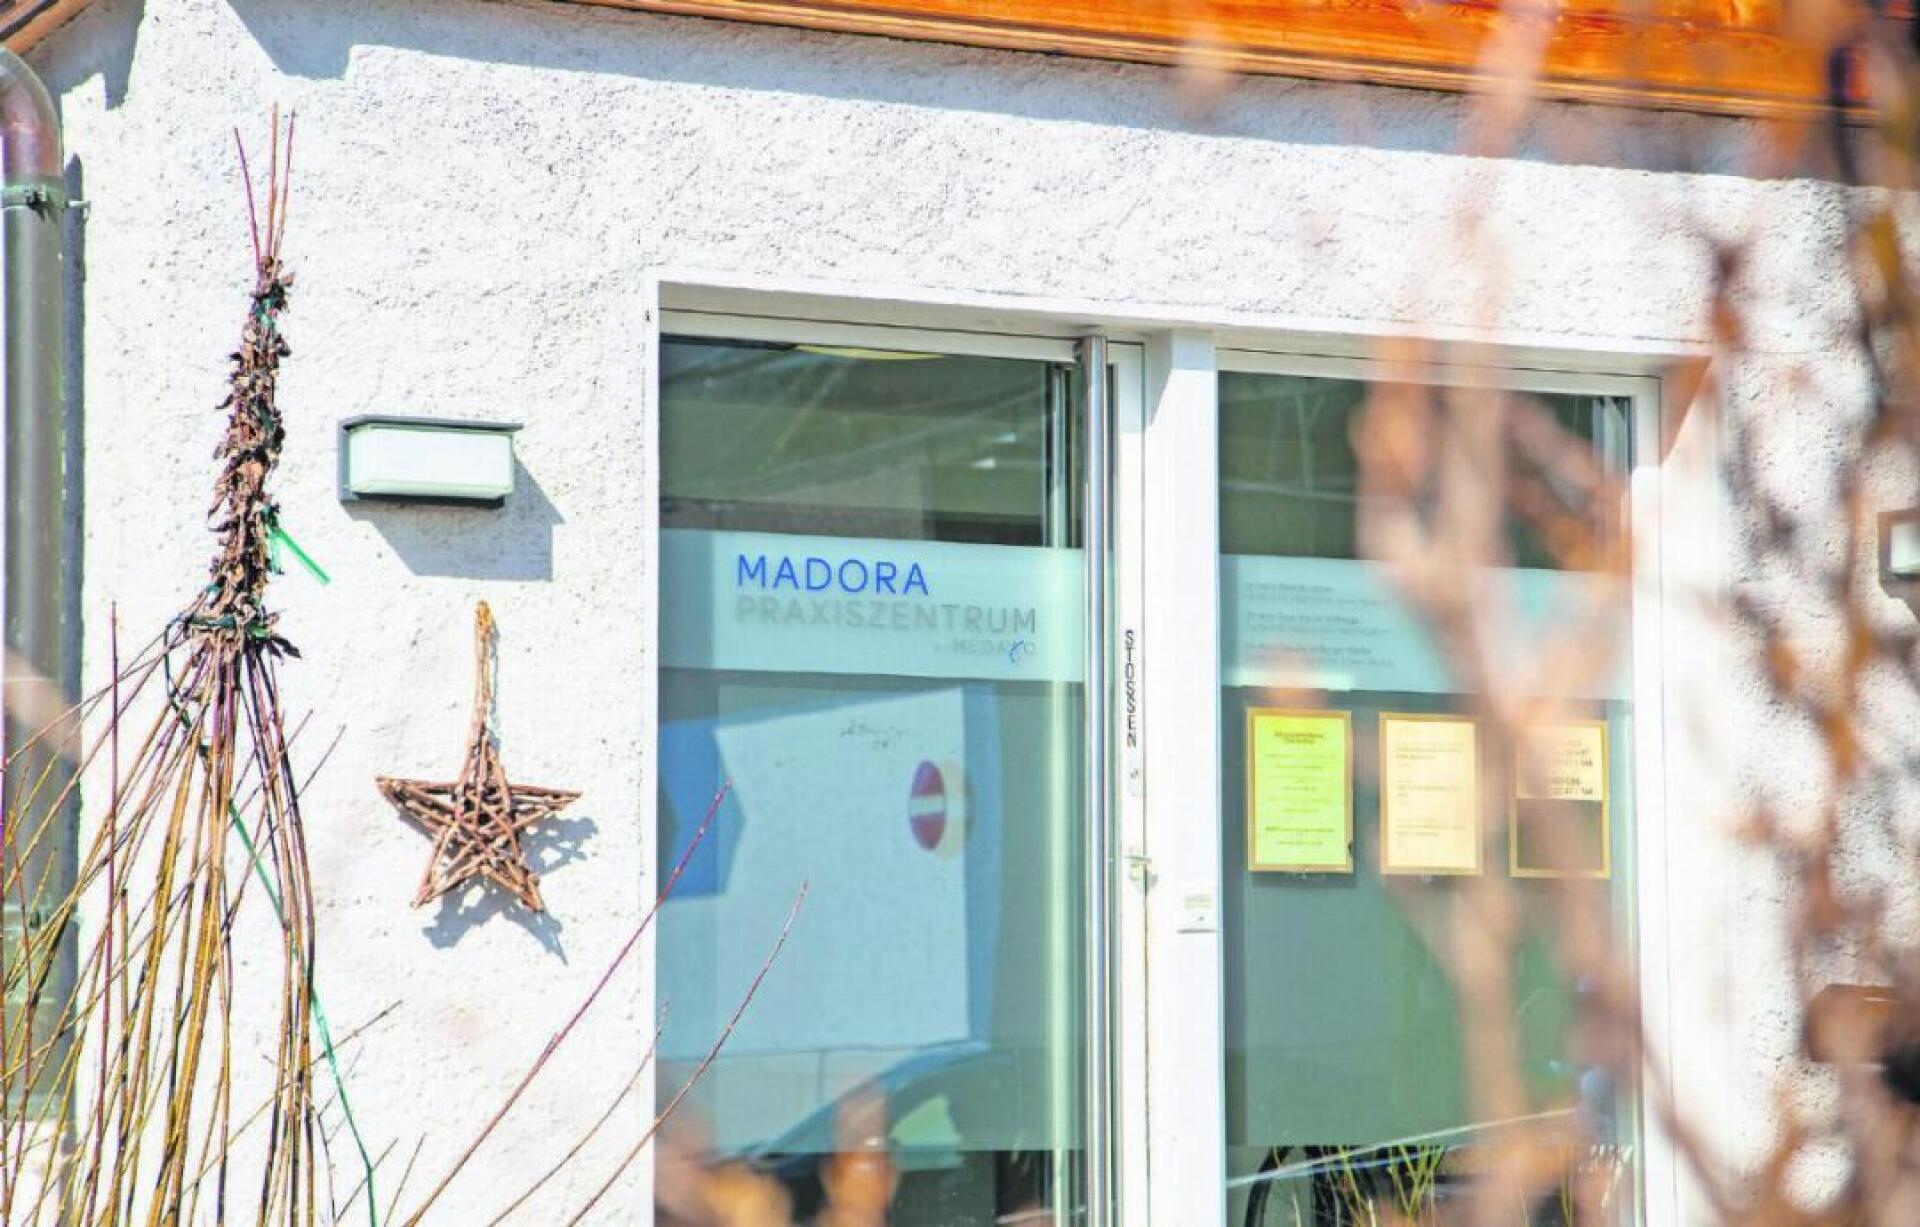 Who will be the next GP at the Madora Practice Centre? The Medaxo Group is looking for successors. PHOTO: JOCELYNE PAGE